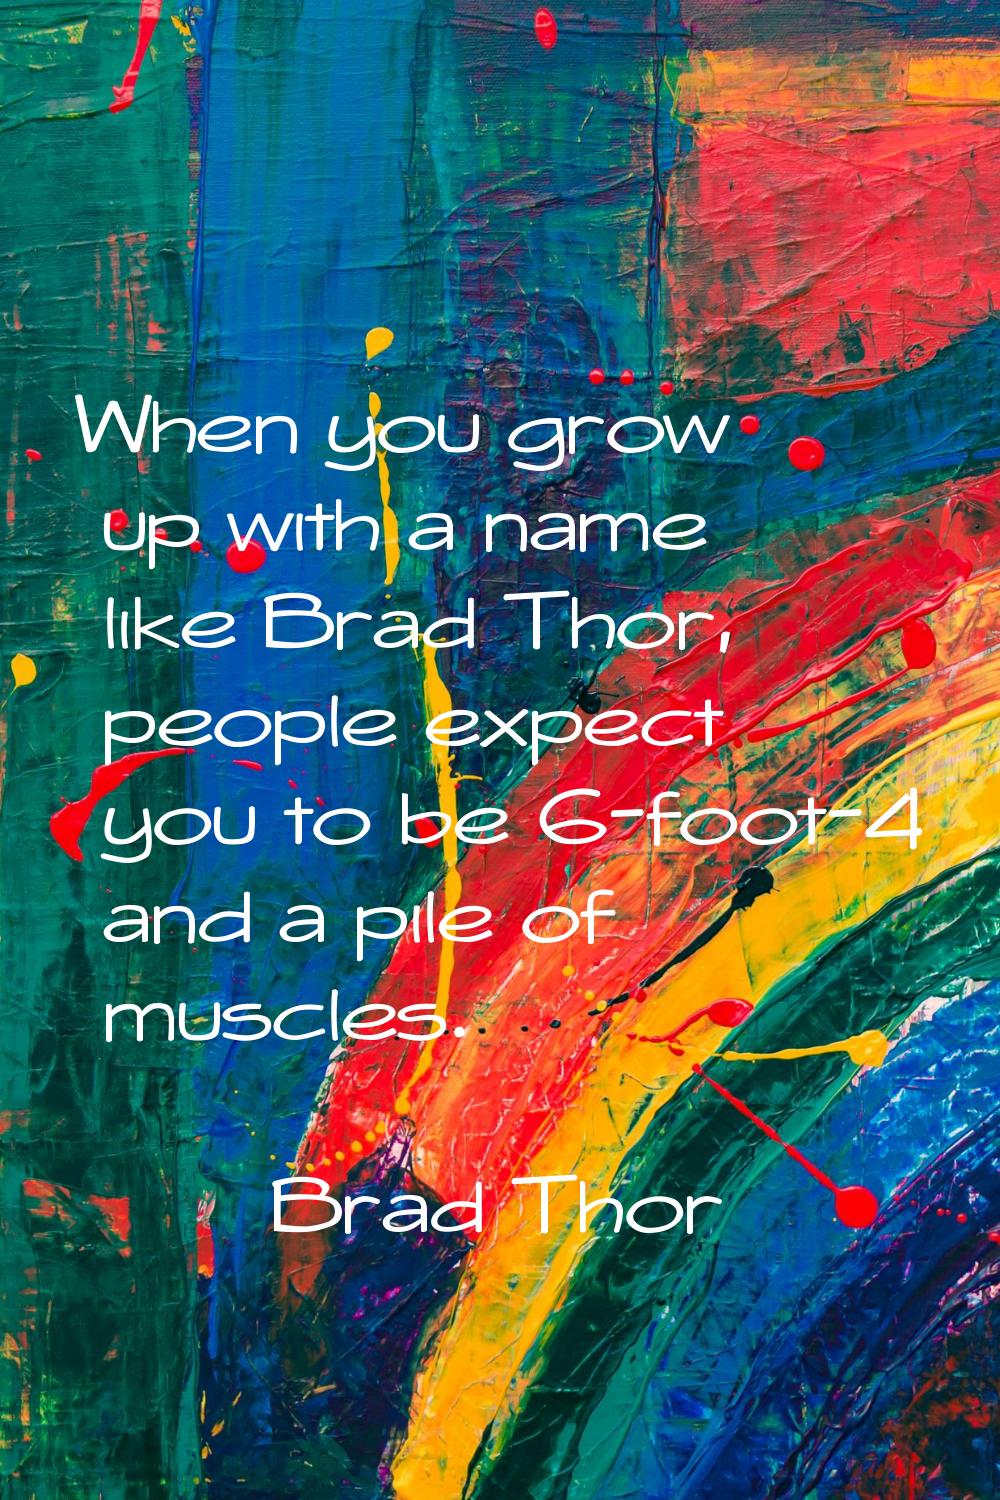 When you grow up with a name like Brad Thor, people expect you to be 6-foot-4 and a pile of muscles